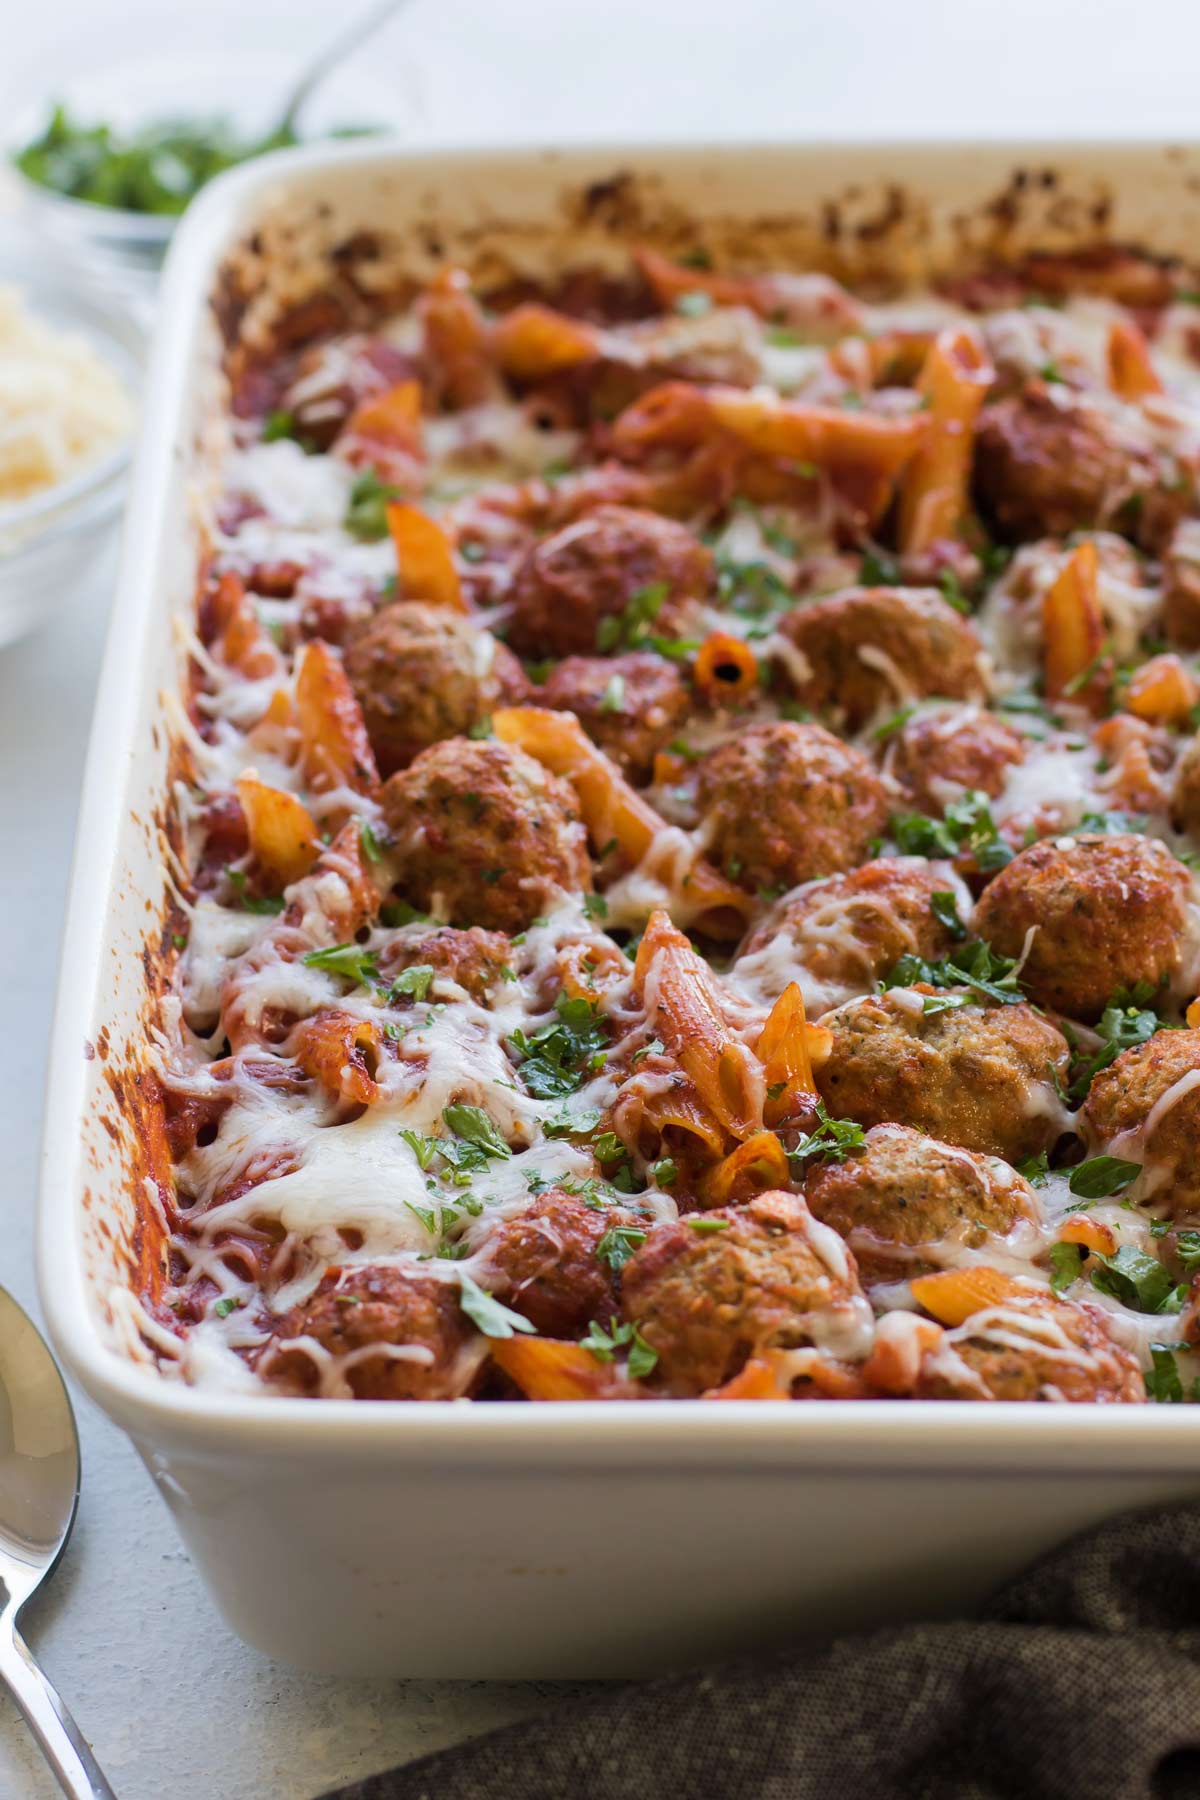 Baked Penne with Meatballs